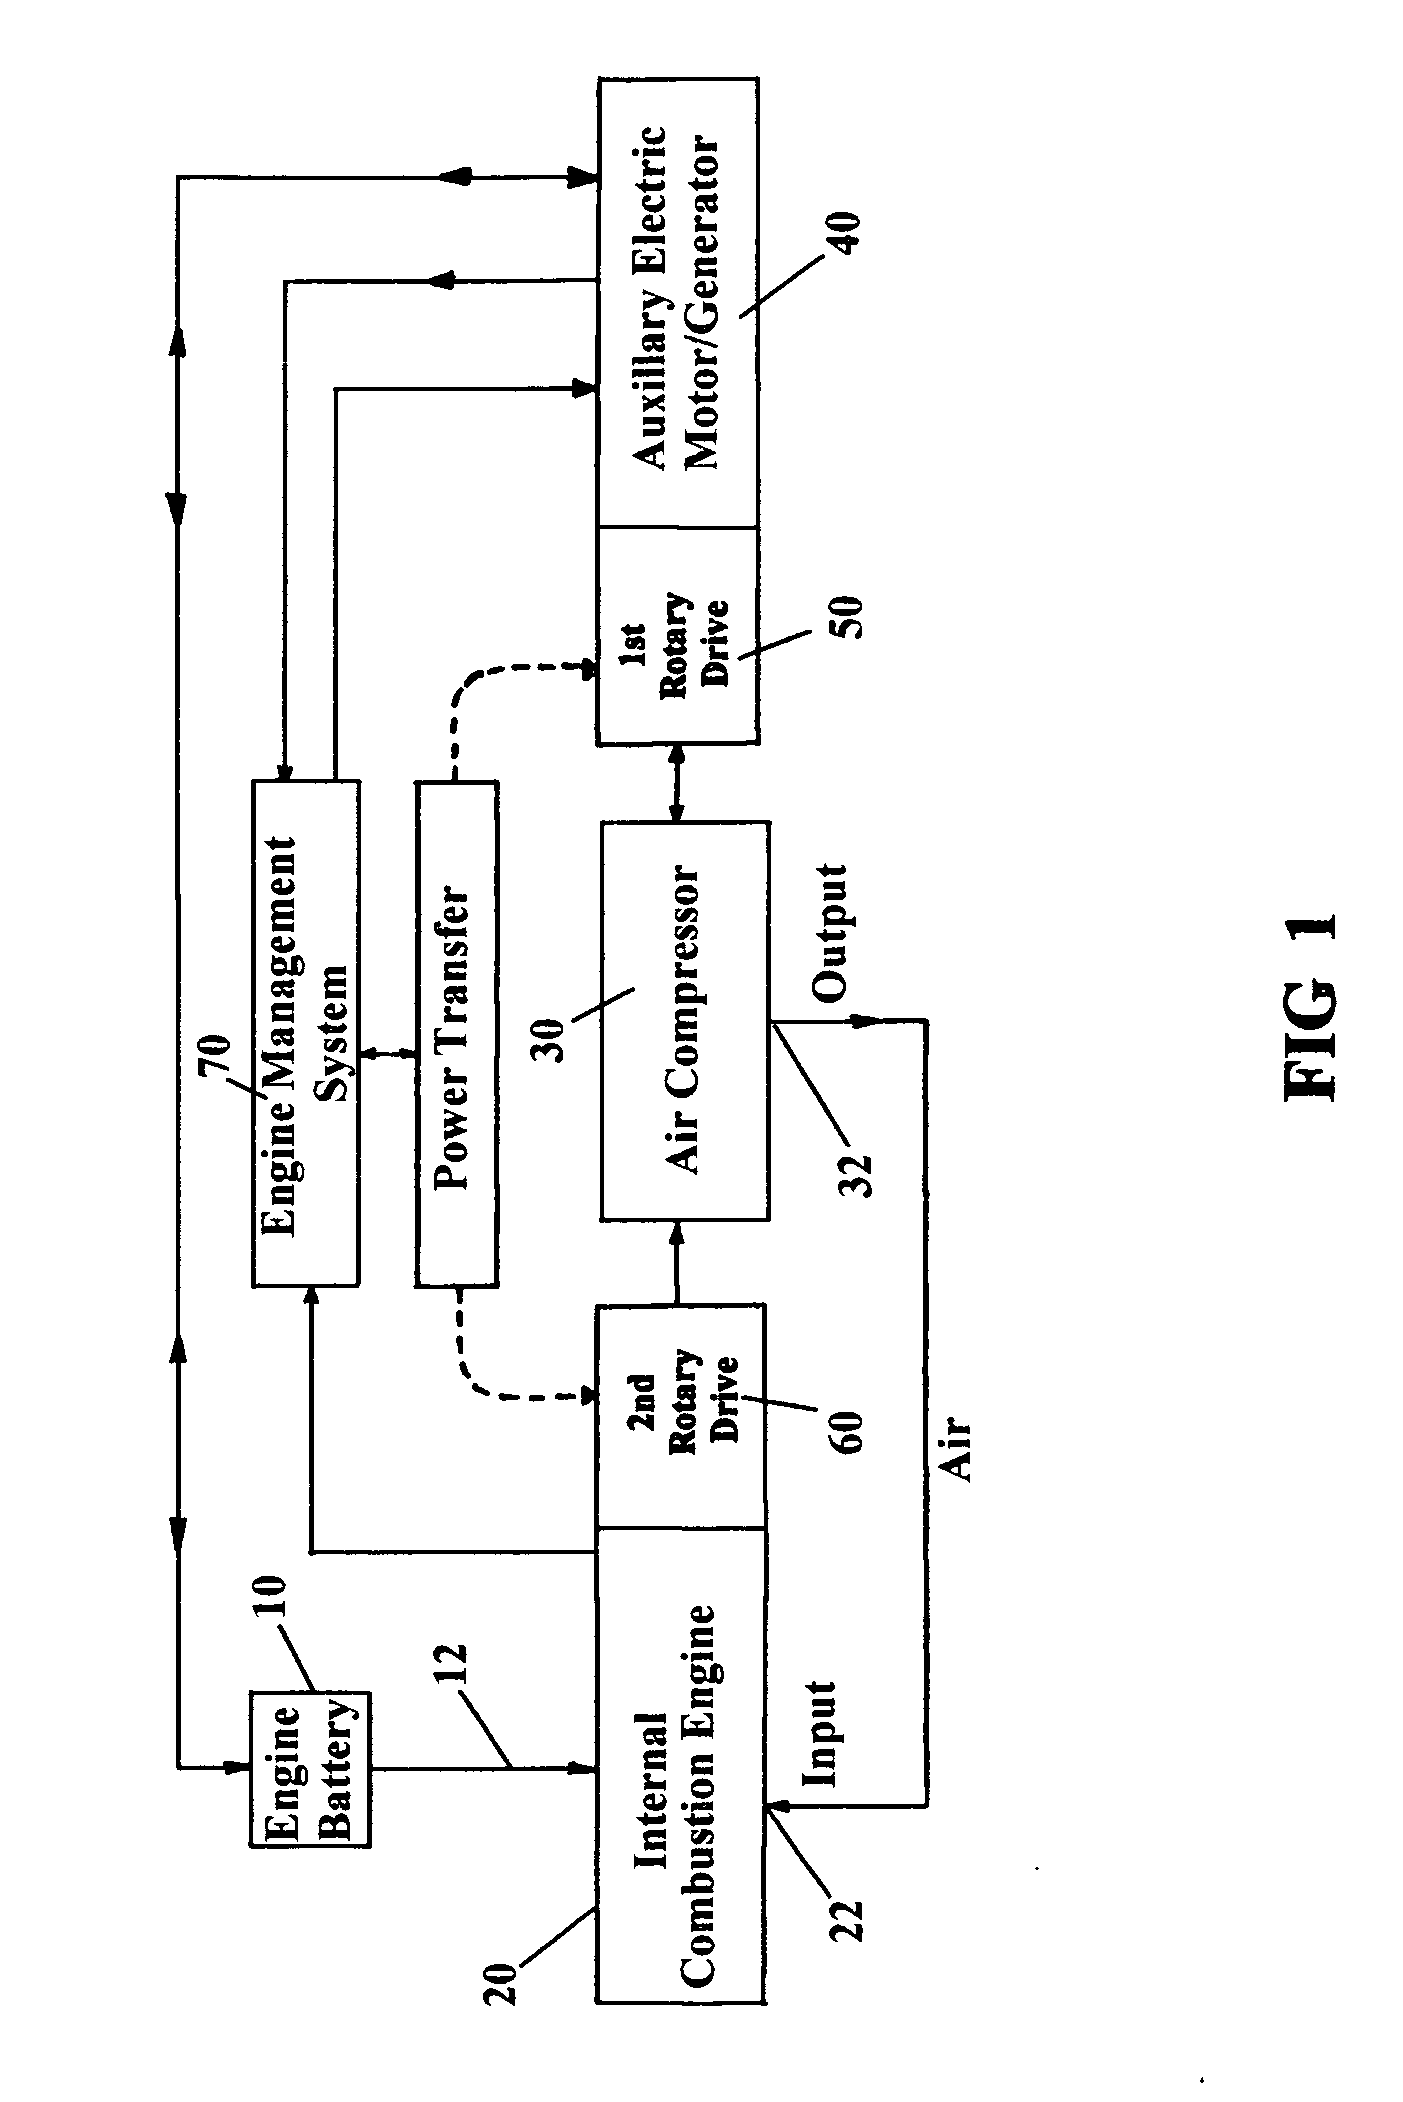 Electric motor assisted mechanical supercharging system